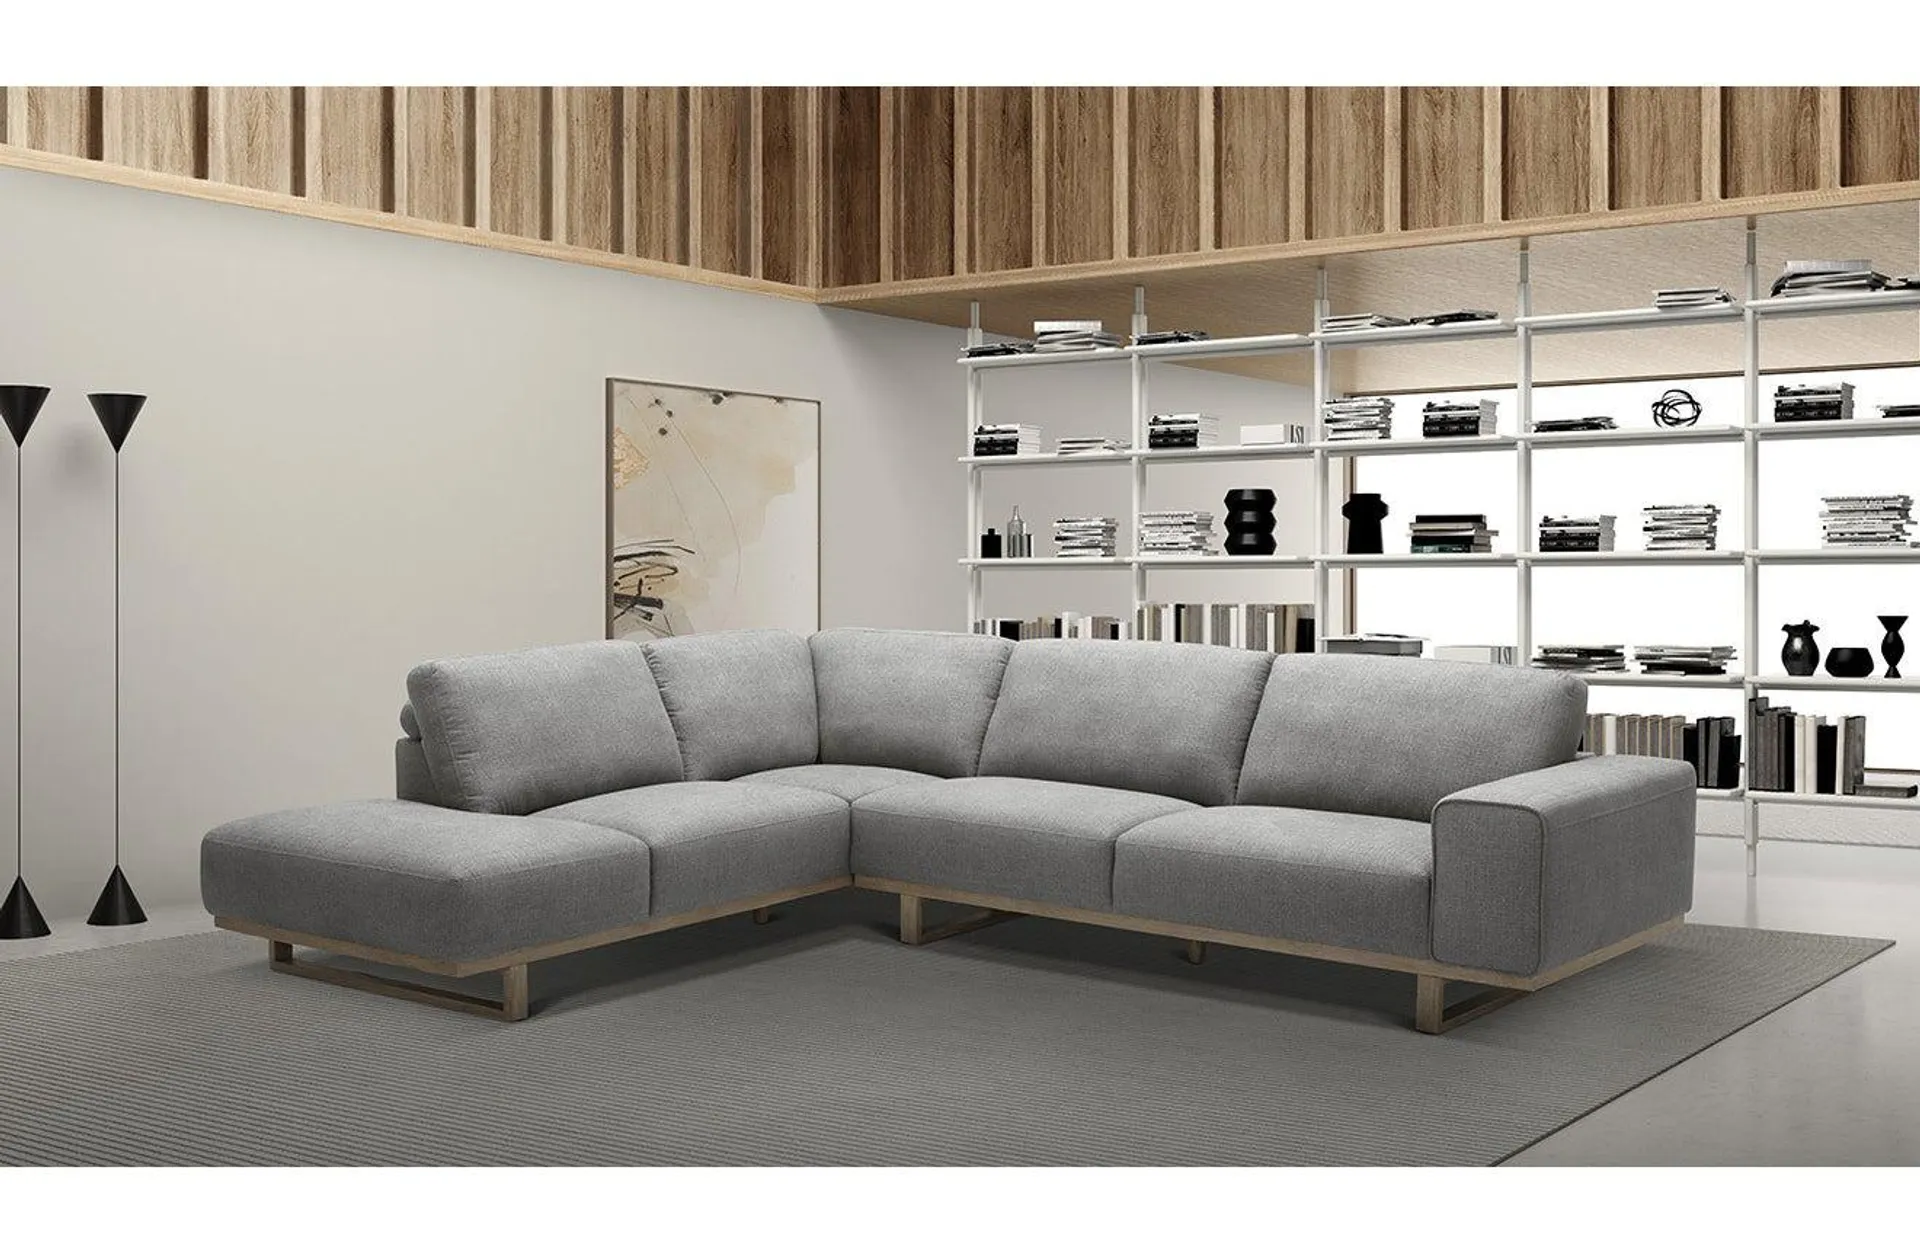 Beckett 4 Seater Left Chaise Lounge Suite - Grey